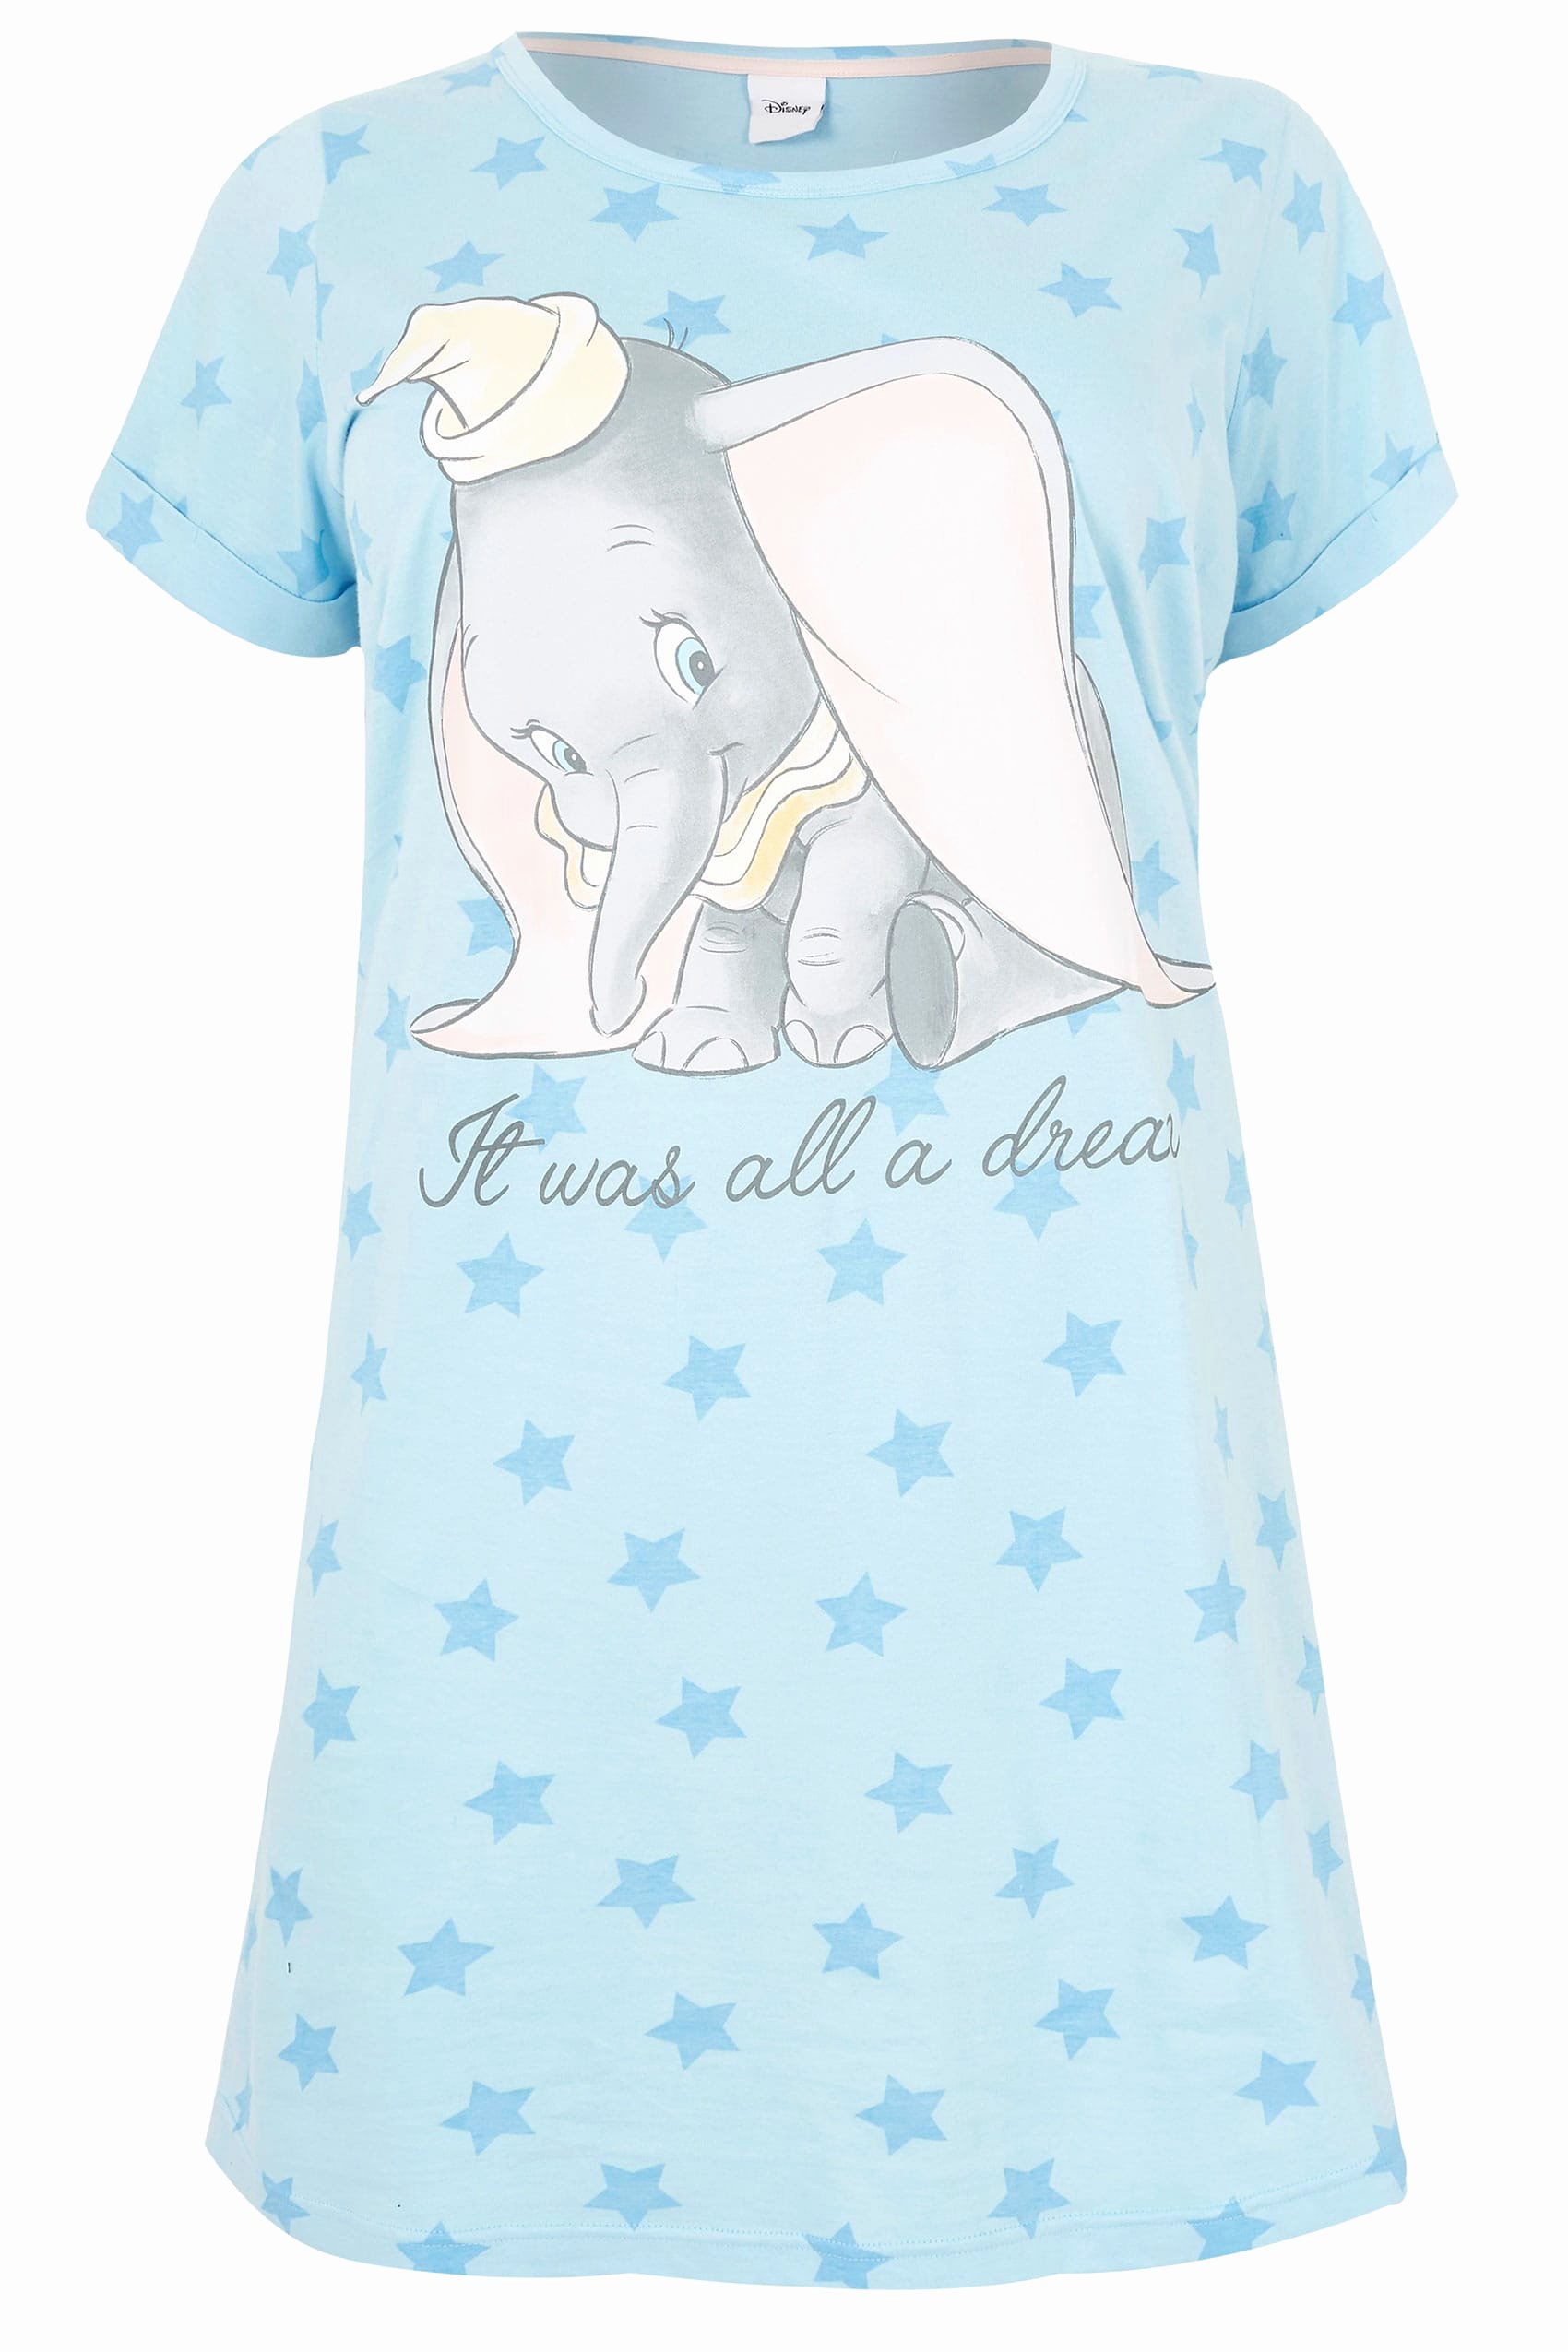 30 Day Review Template Awesome Blue Disney Dumbo &amp; Slogan Print Nightdress Plus Size 16